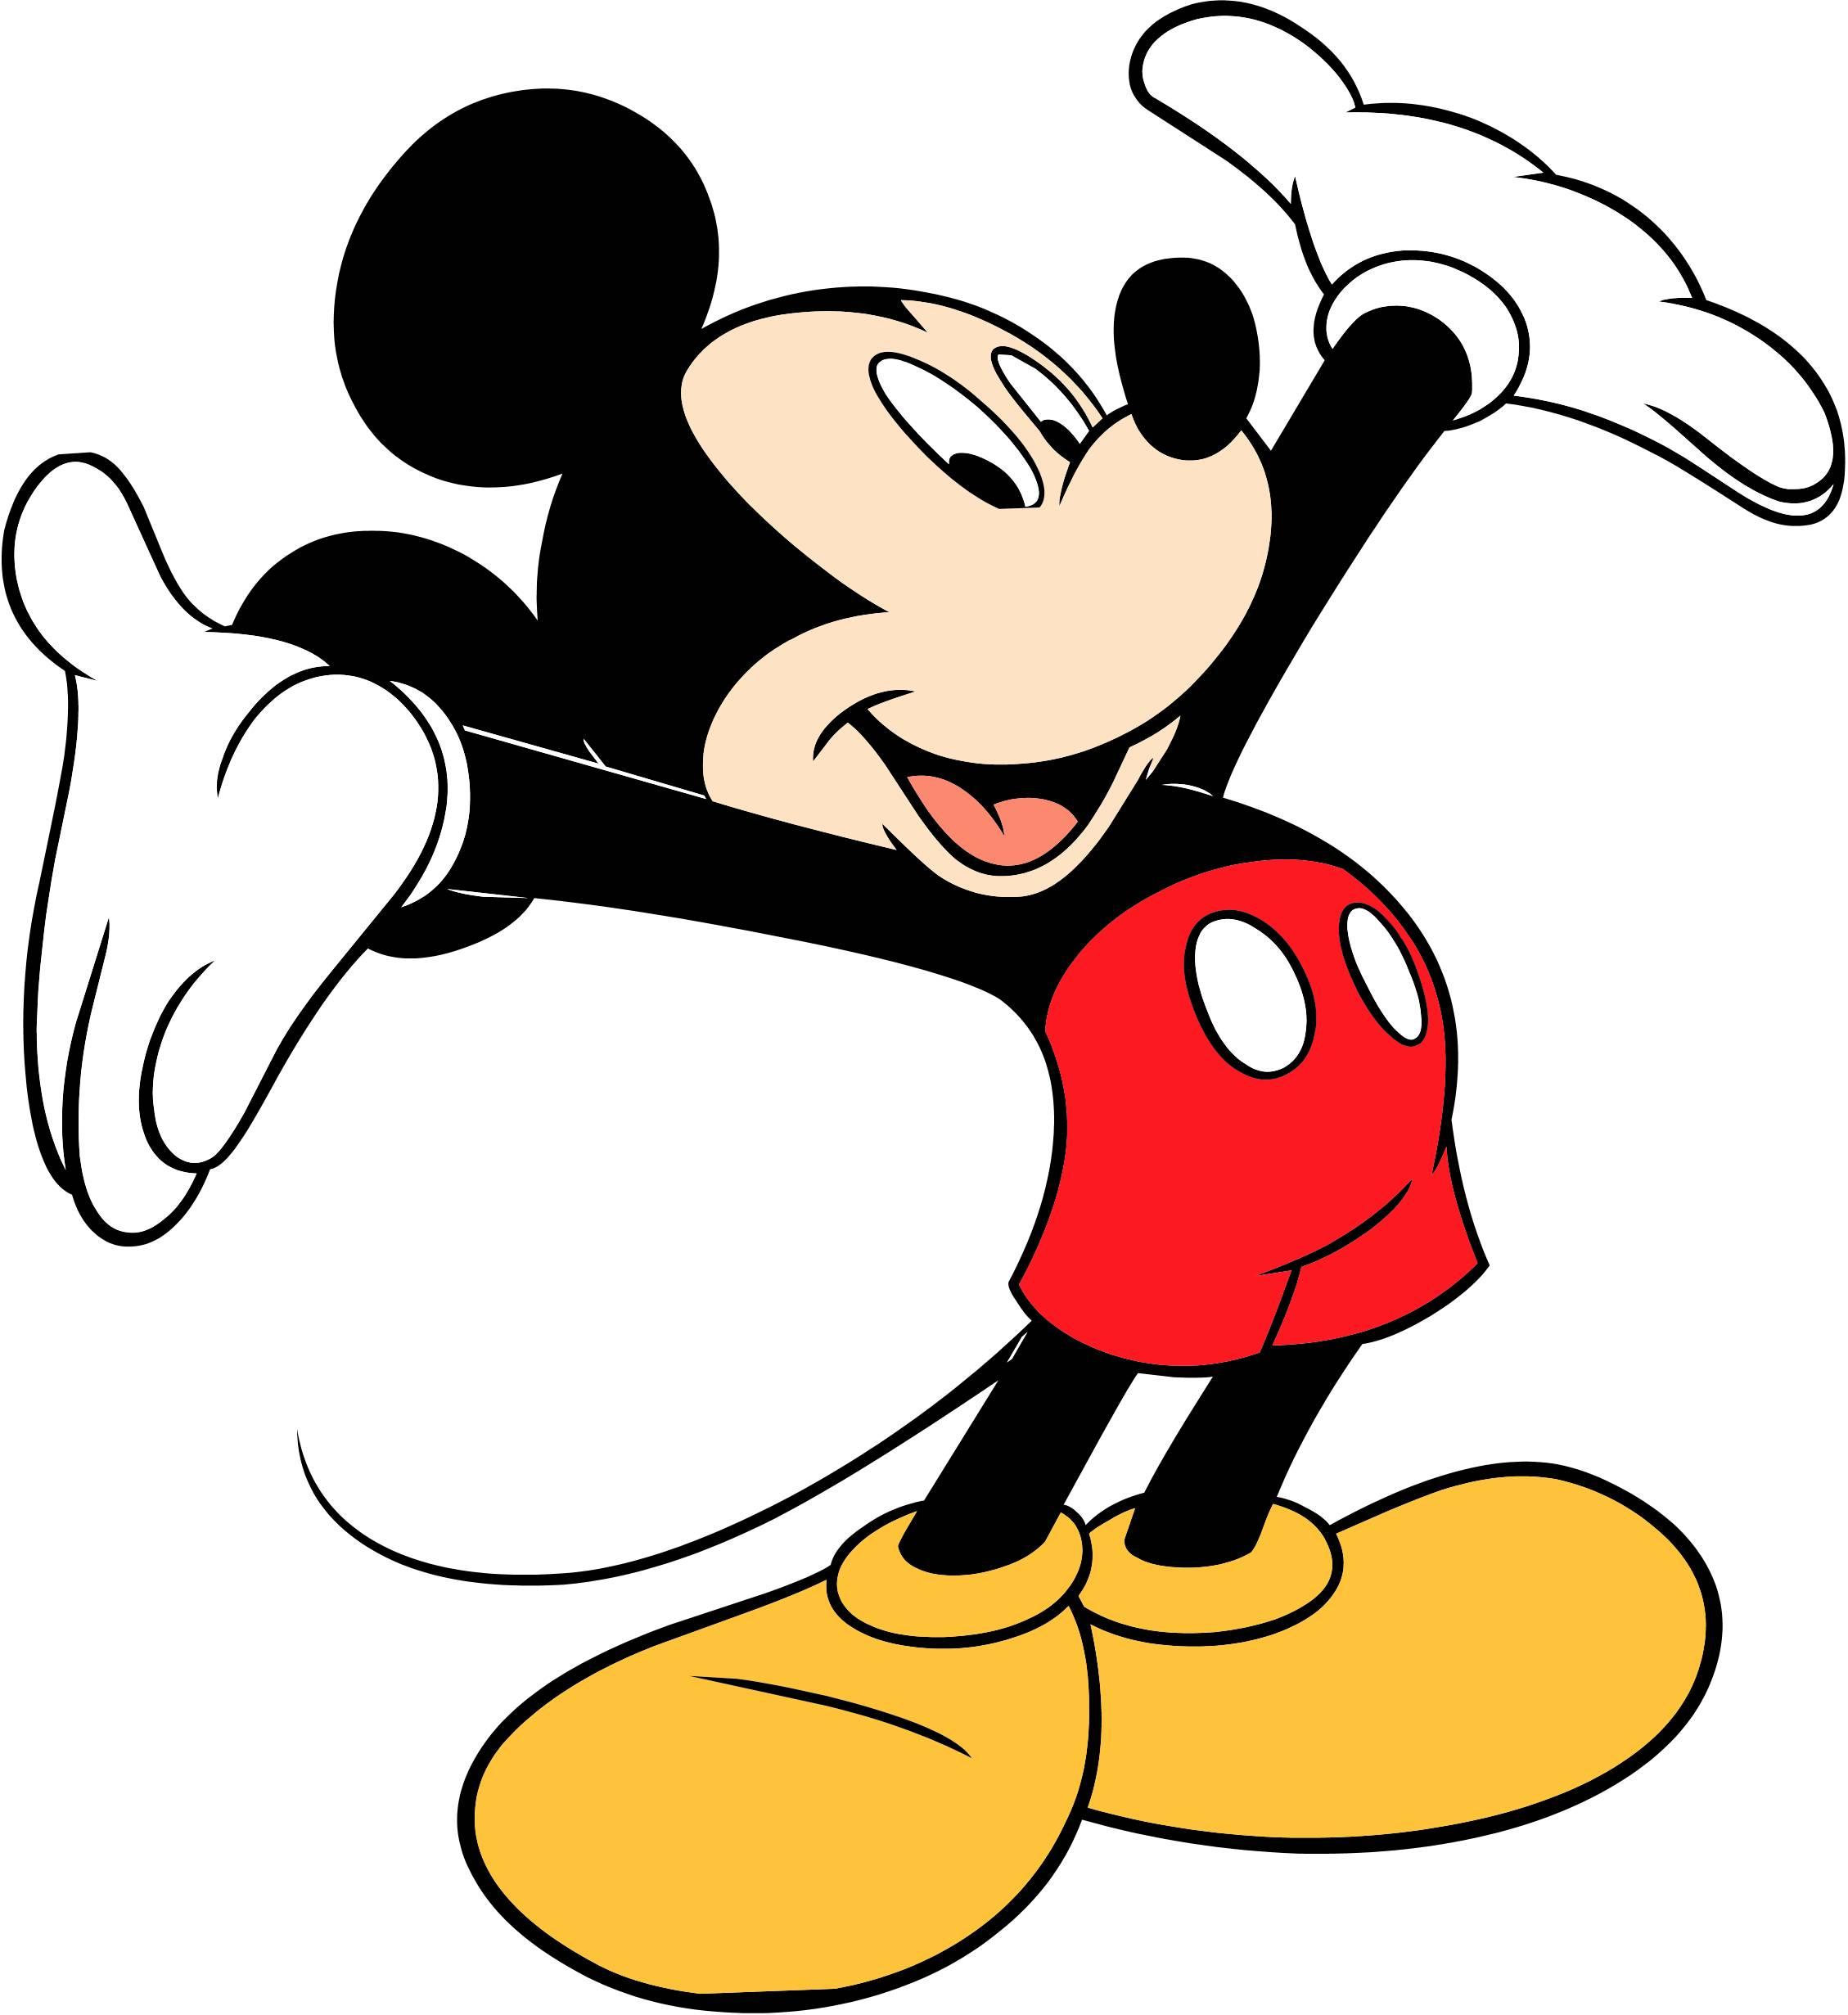 Mickey mouse cartoon images free download clip art jpg 2